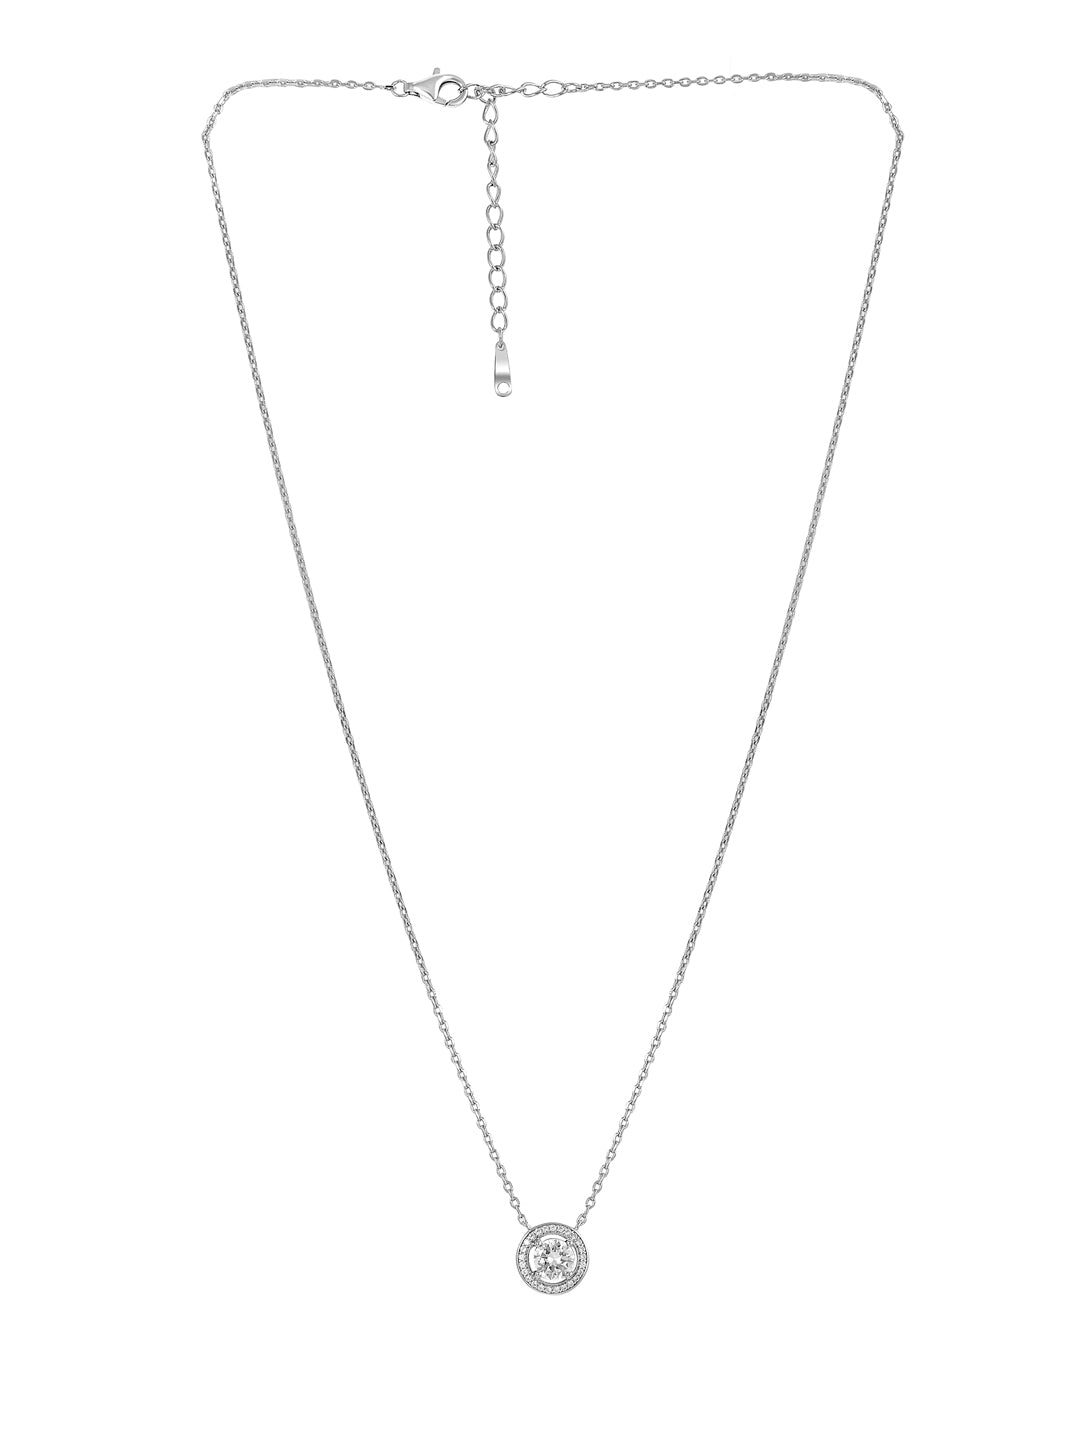 Pure Silver Halo Solitaire Necklace Embellished With Cubic Zirconia Stones. 